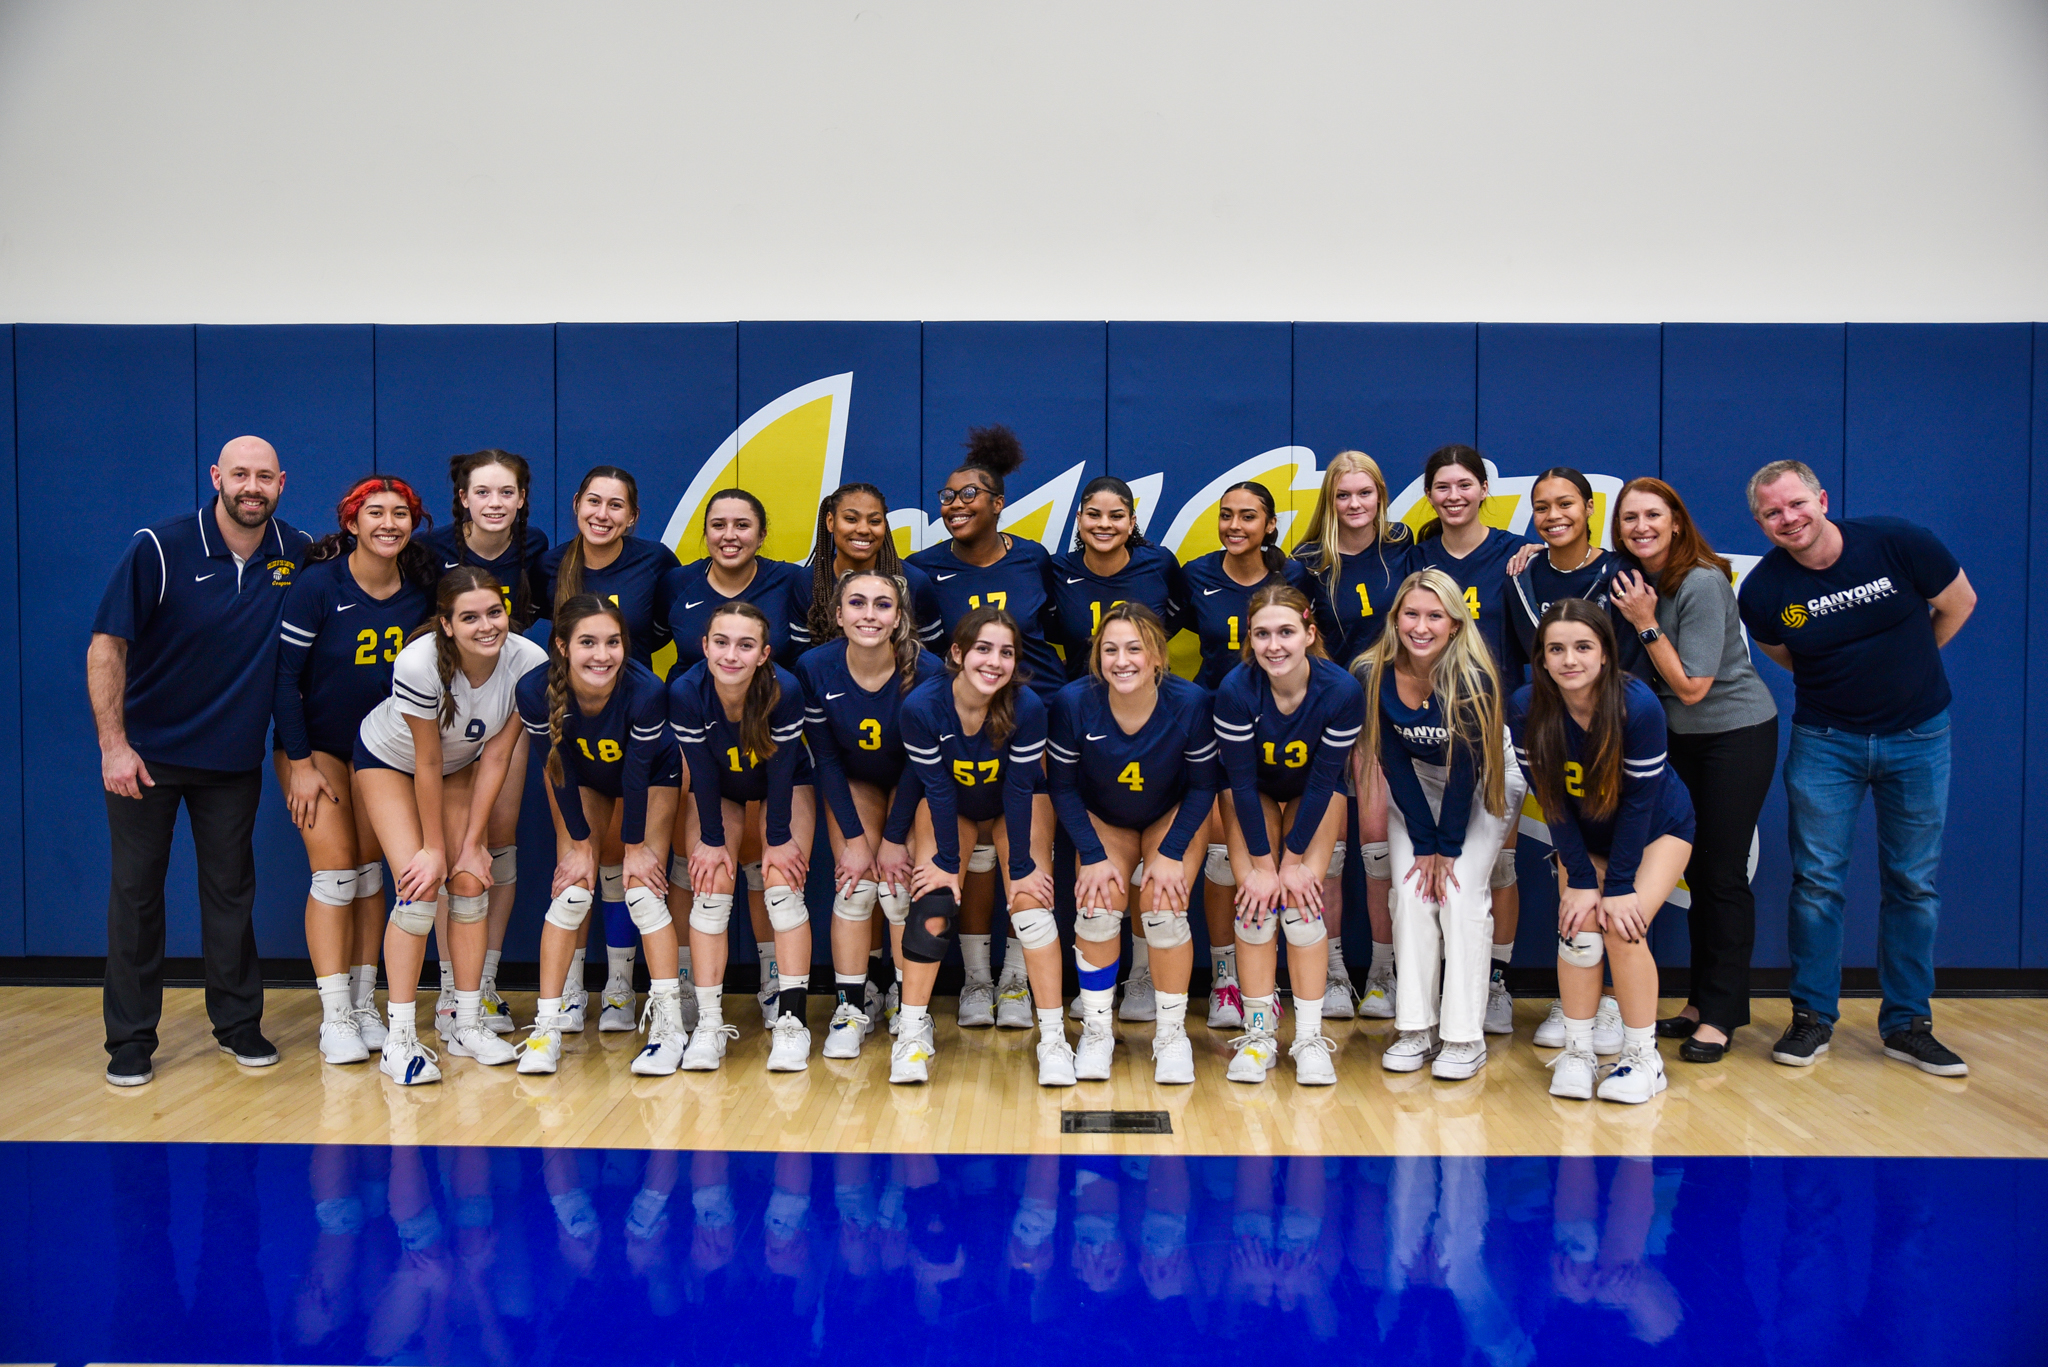 College of the Canyons women's volleyball is playing in the CCCAA Women's Volleyball State Championship tournament for the second straight year and sixth time in program history (2007, 2015, 2017, 2021, 2022) after defeating No. 2 Irvine Valley College by a 3-1 (25-17, 25-22, 15-25, 28-26) win on Saturday night. — Mari Kneisel/COC Sports Information.